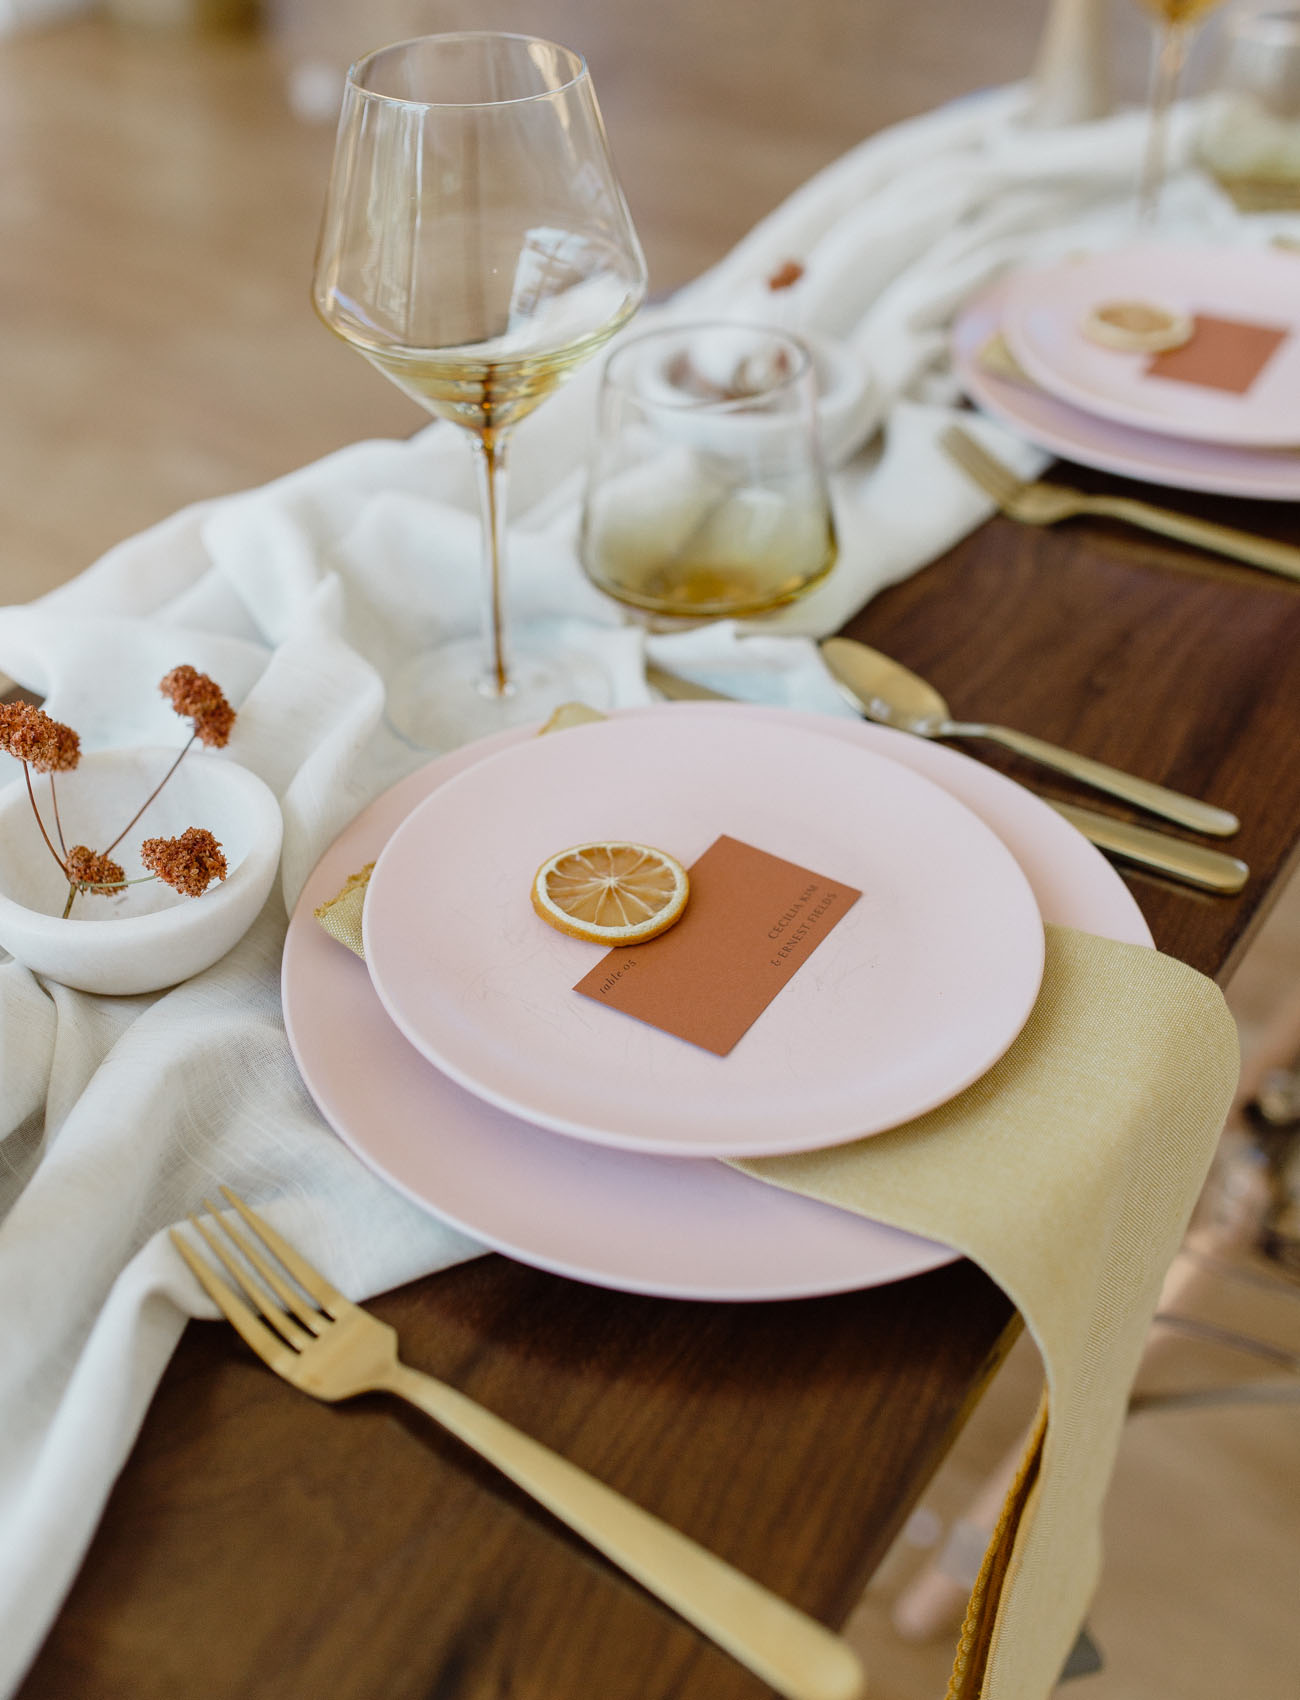 Matte pink plates and chargers, gold cutlery and colored glasses made up the look